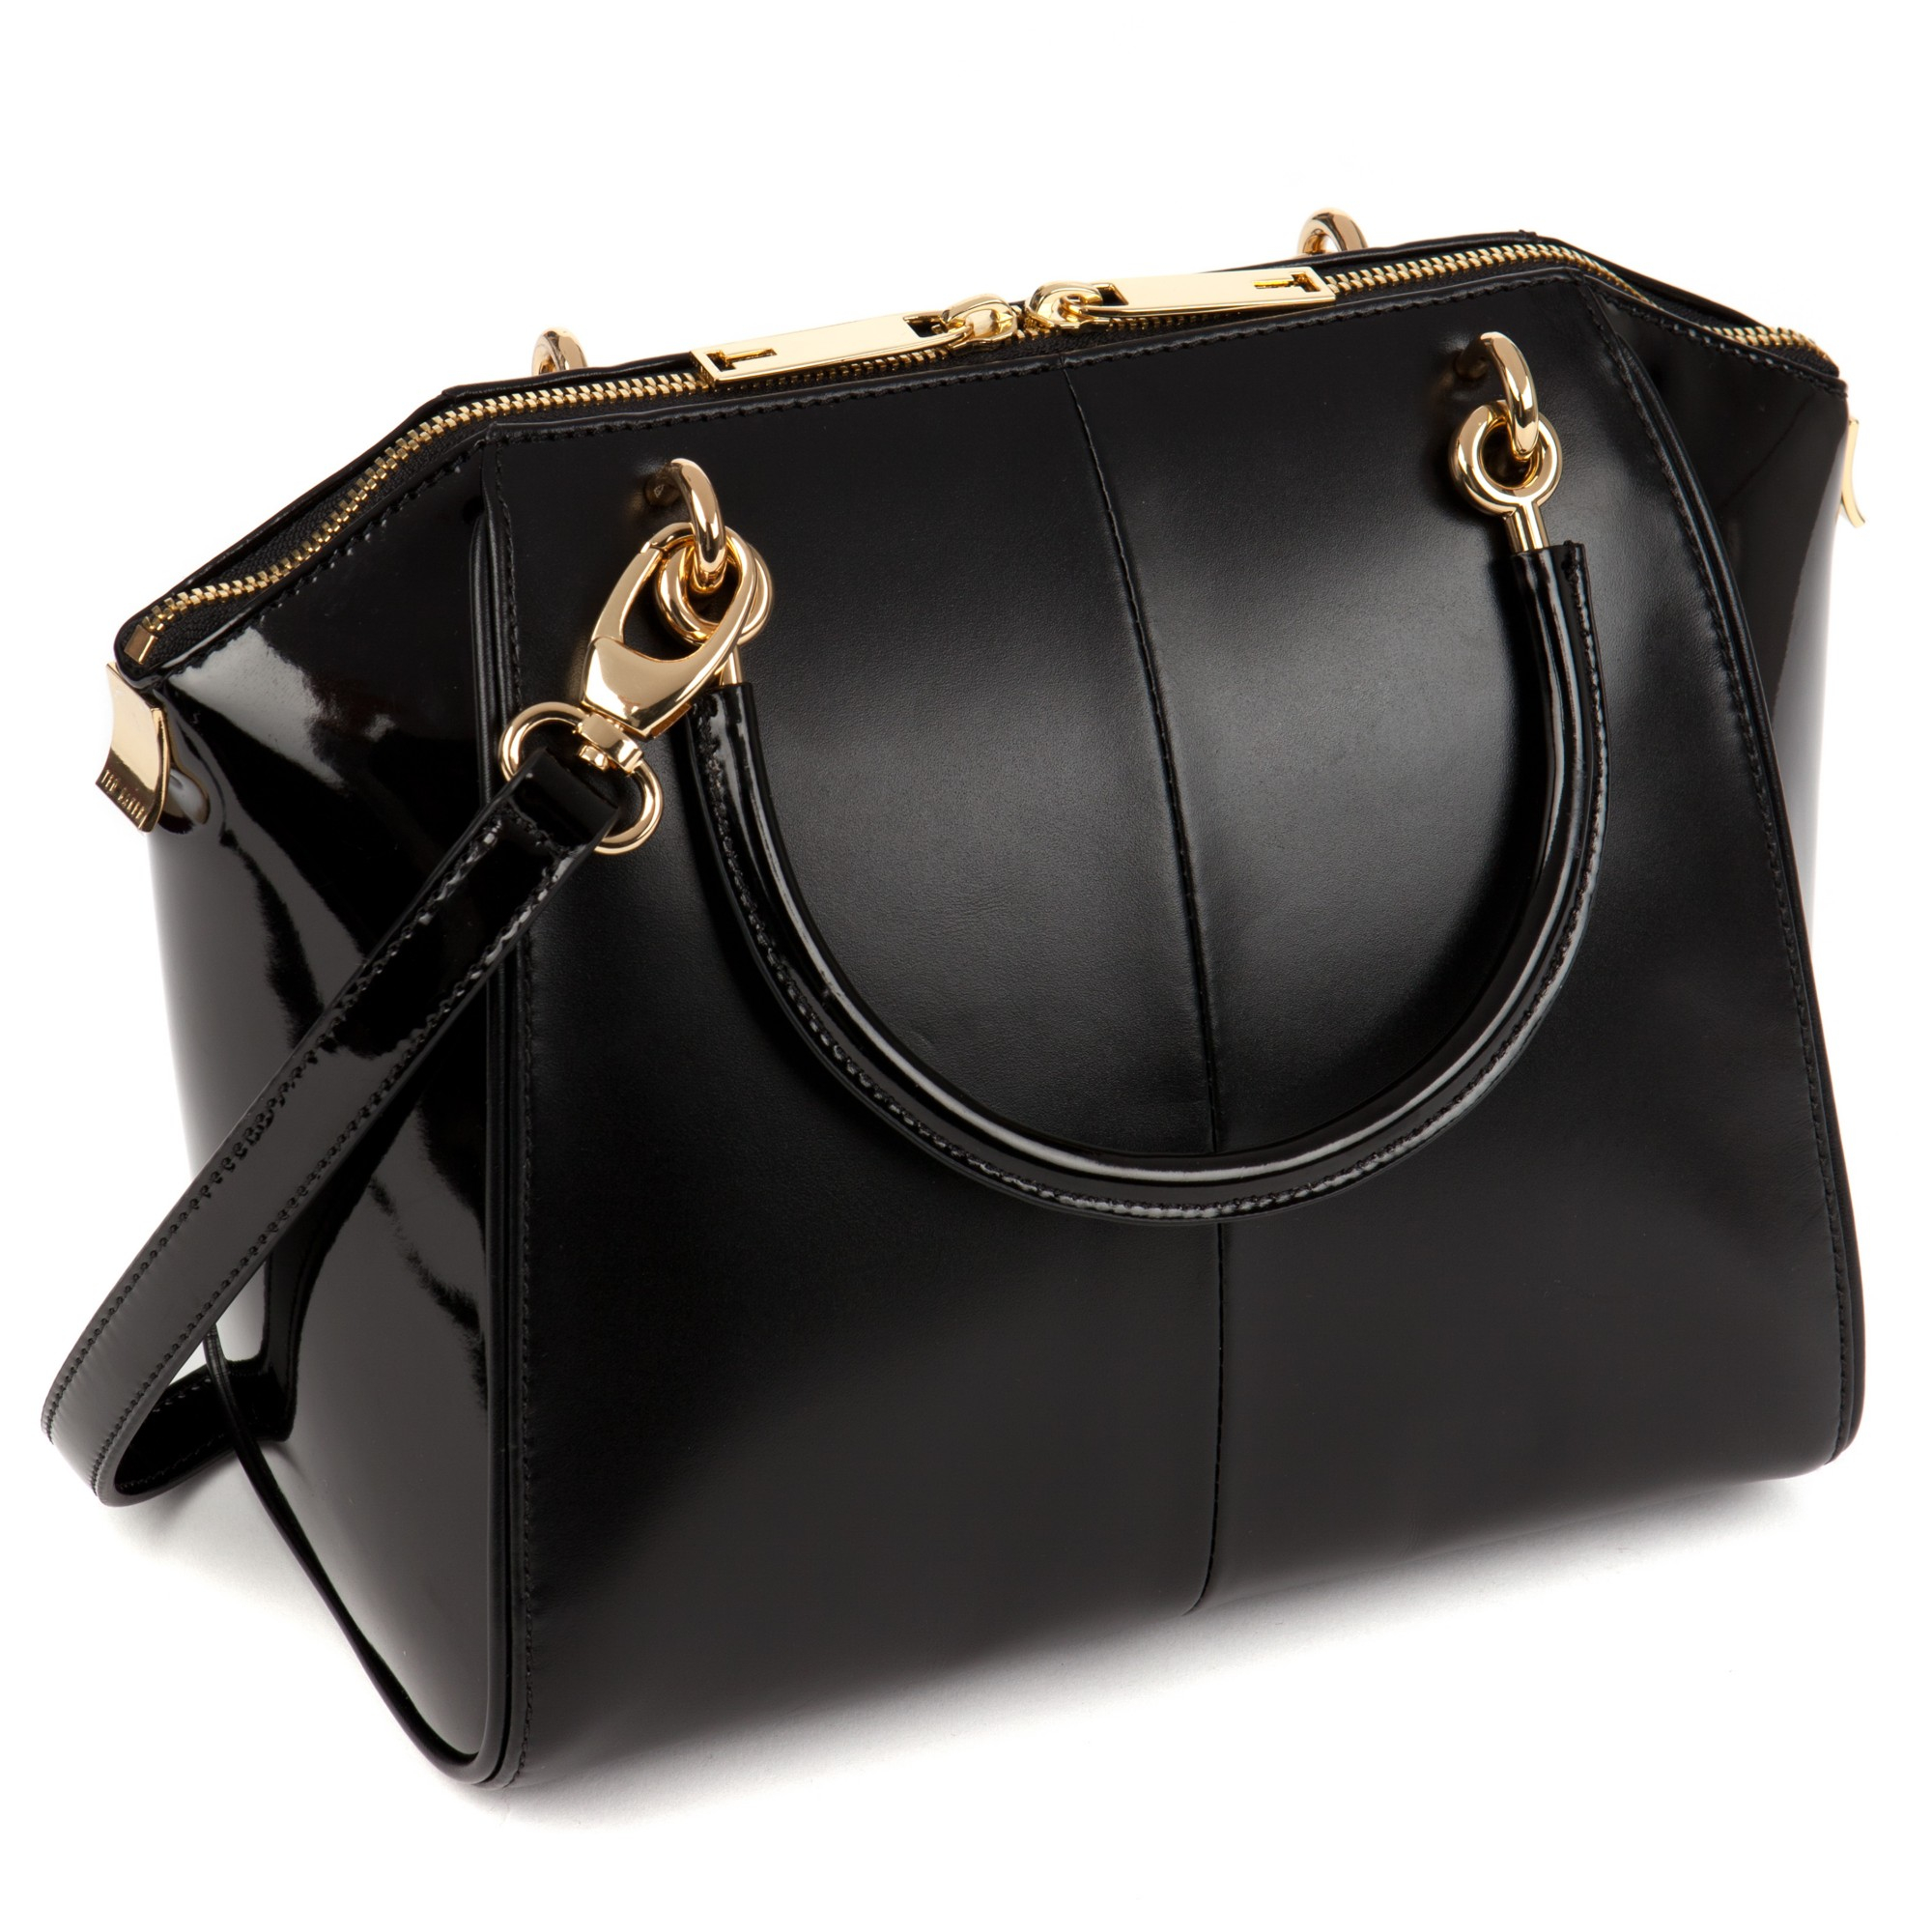 Lyst - Ted Baker Small Slim Bow Tote Bag in Black